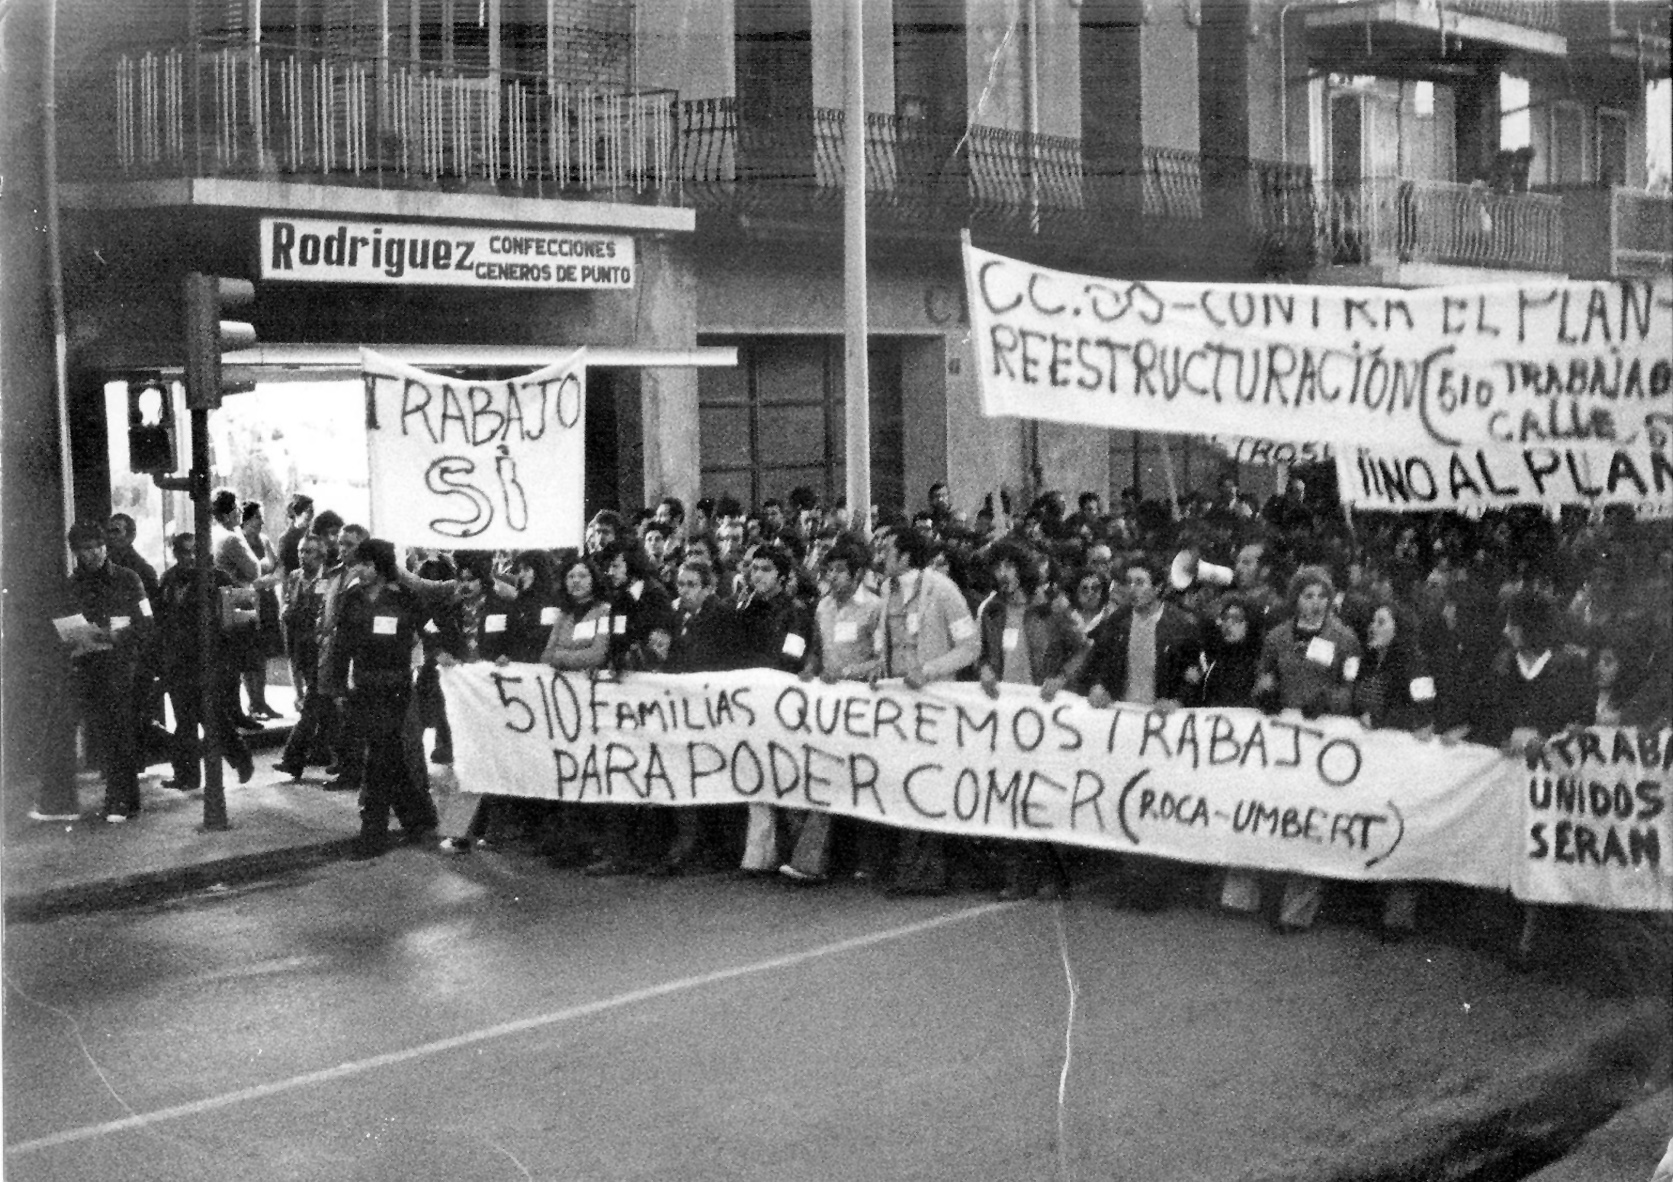 Granollers, 1977